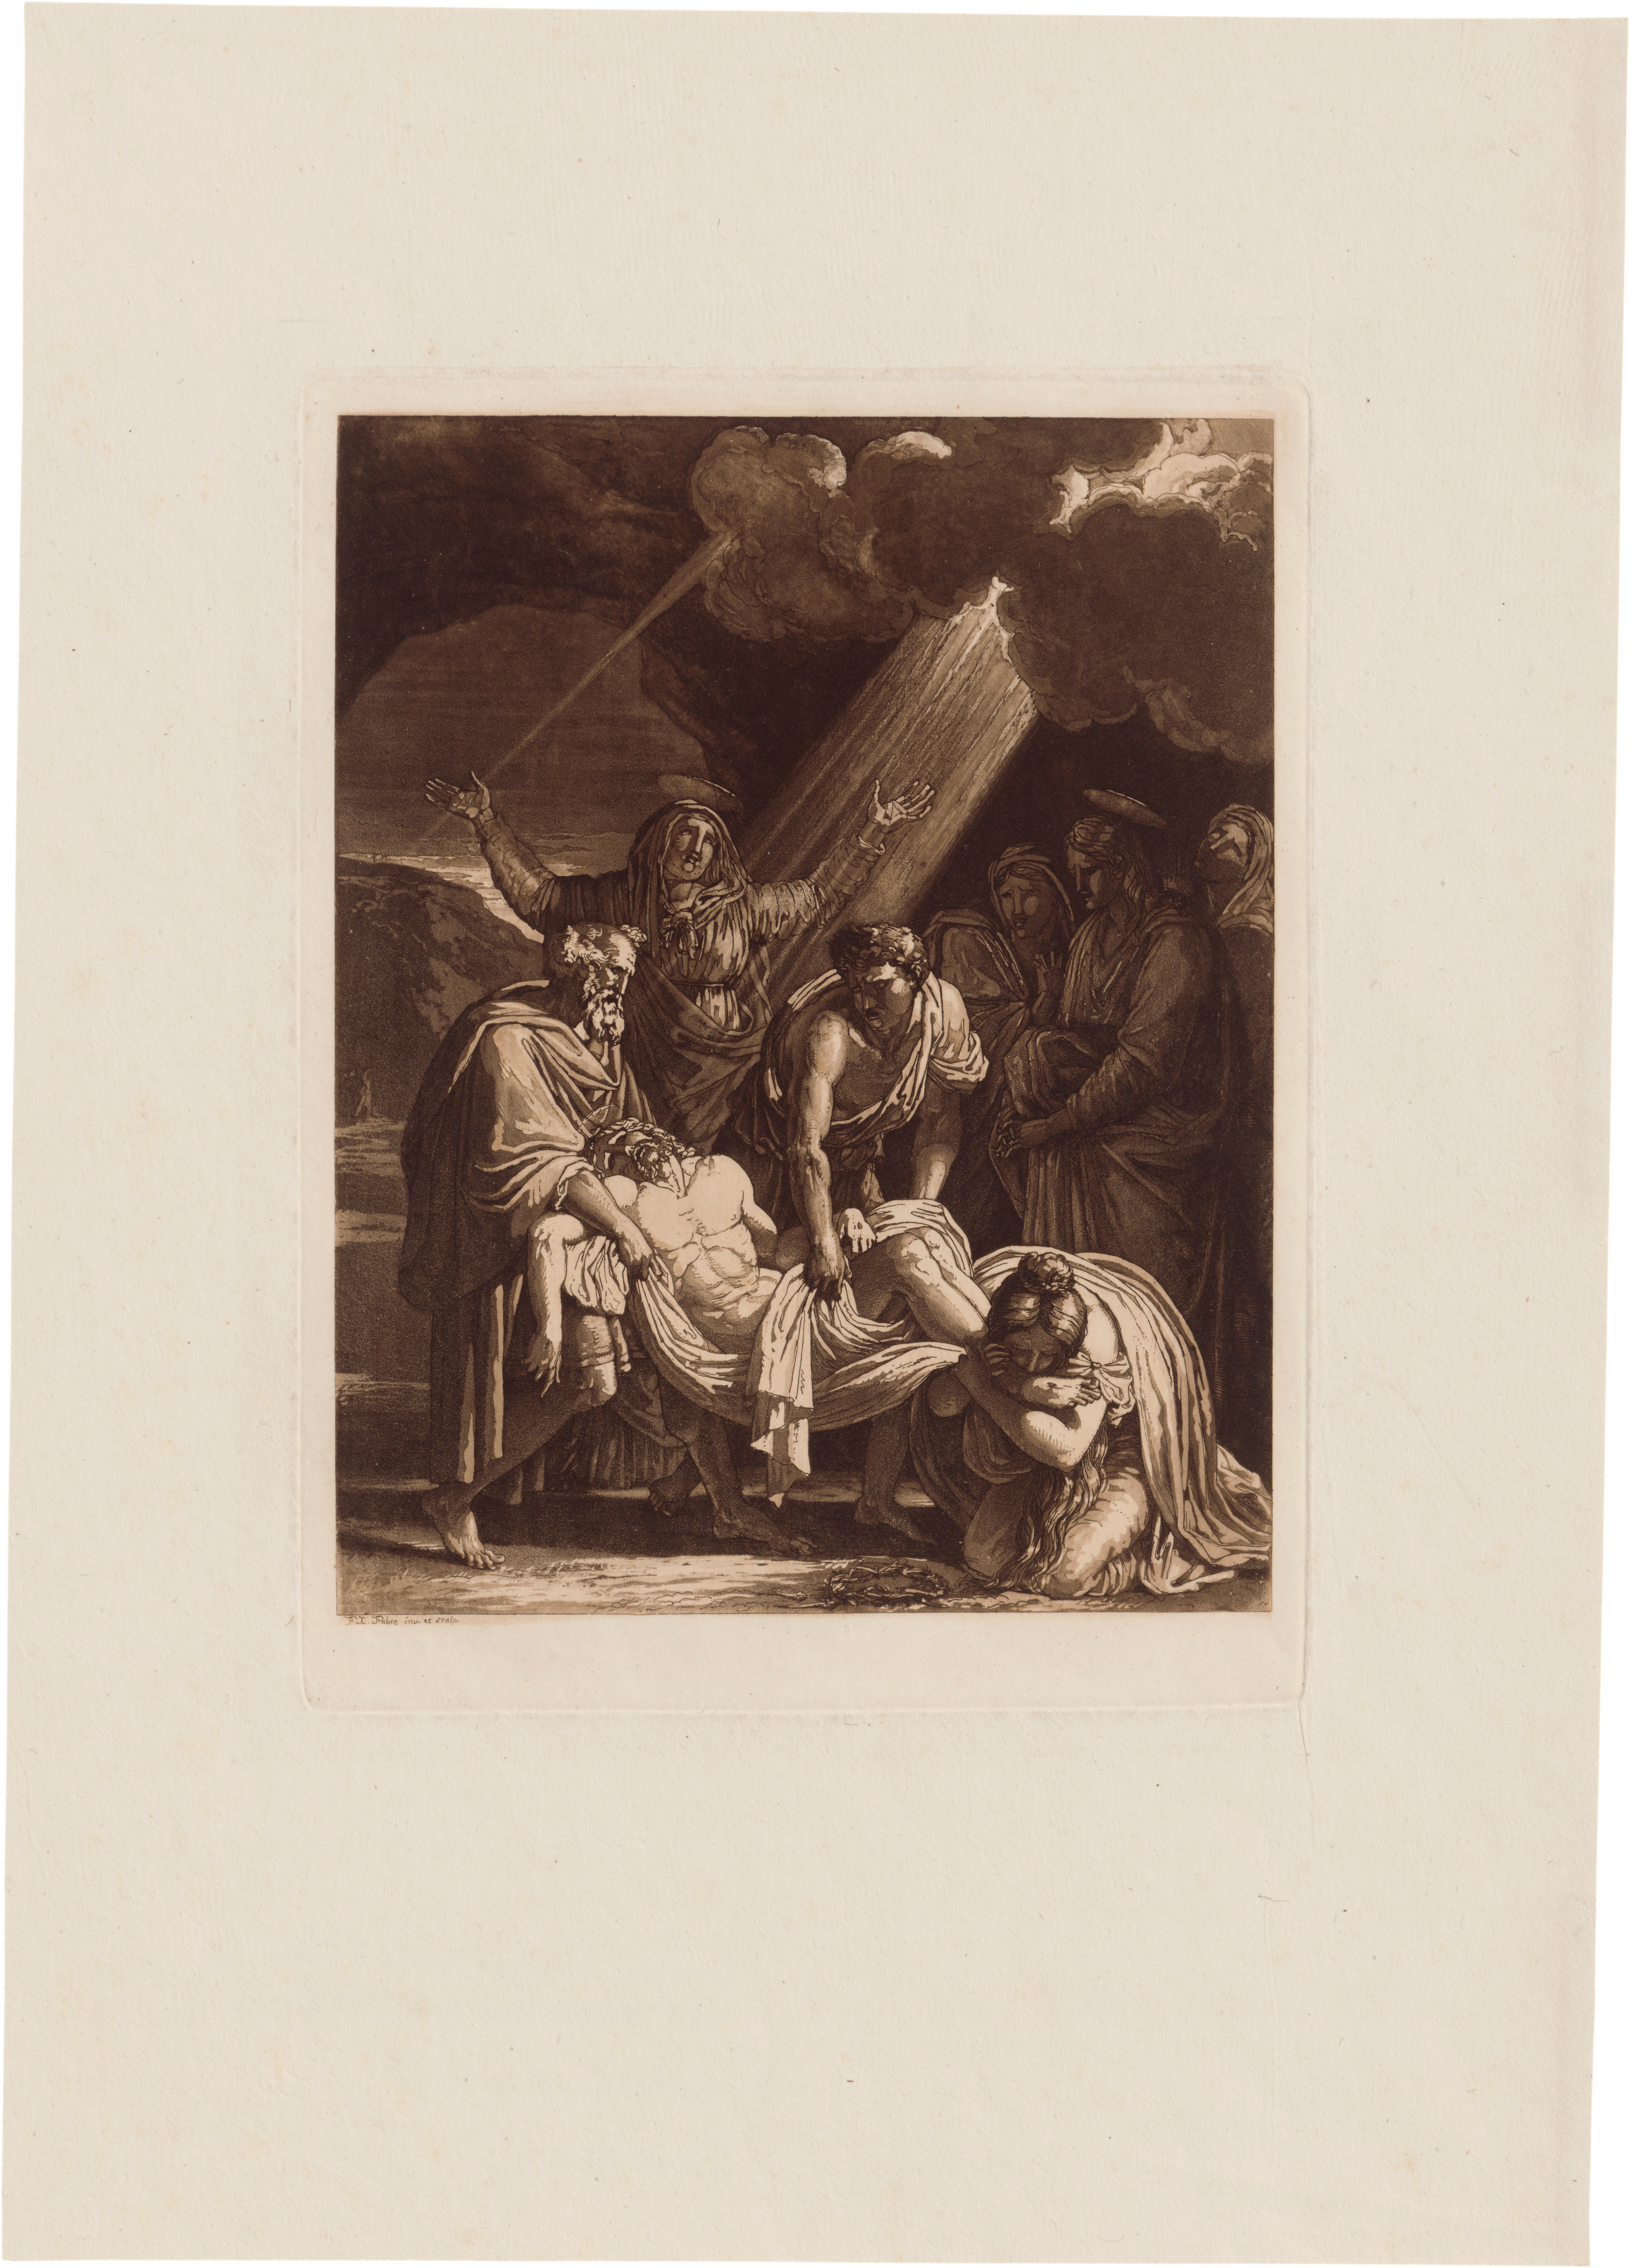 32_Fabre_print The Lamentation of Christ; The Angel Appears to the Women at the Grave